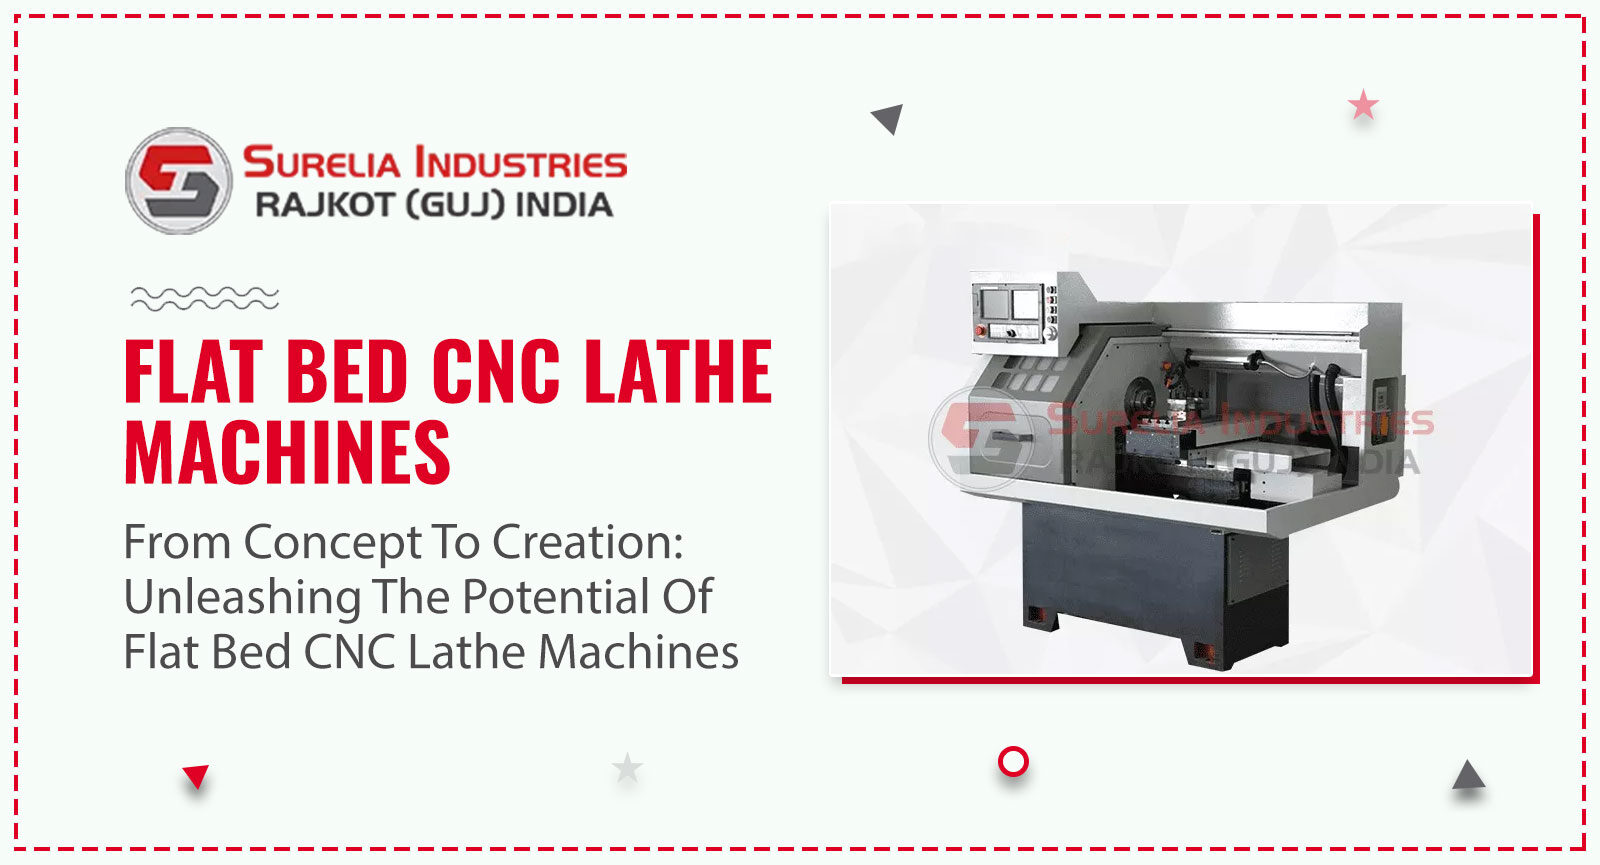 From Concept to Creation: Unleashing the Potential of Flat Bed CNC Lathe Machines, Lathe Machine